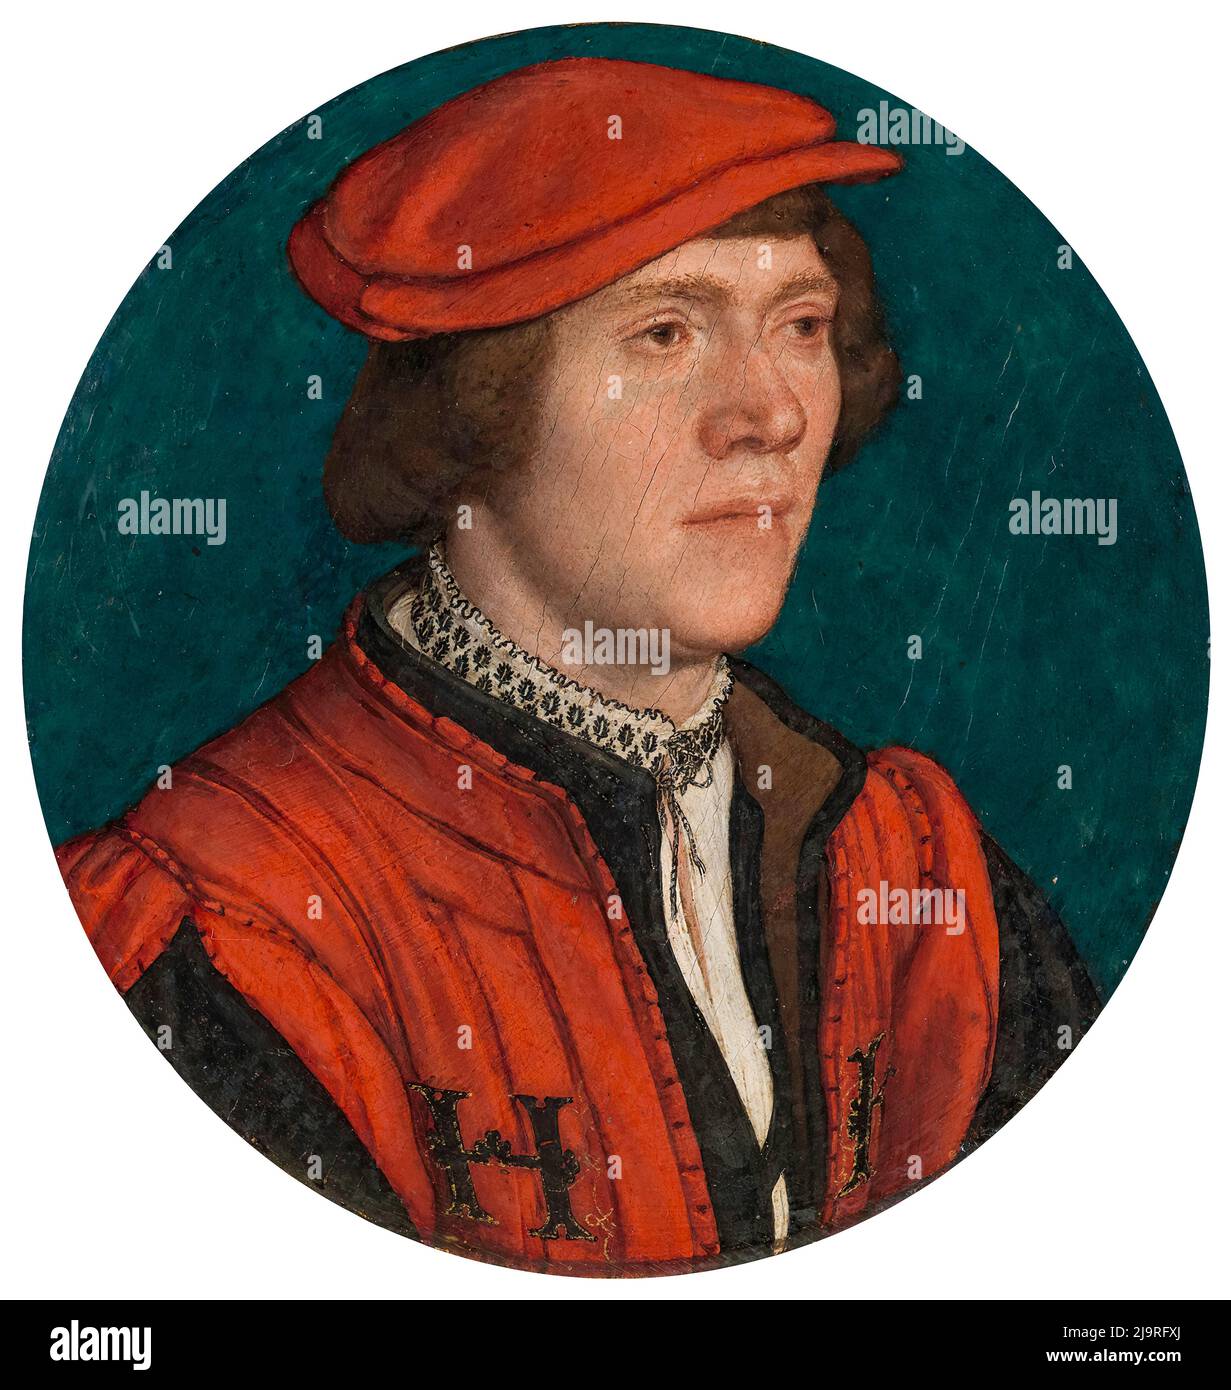 Hans Holbein the Younger, Portrait of a Man in a Red Cap, painting in oil on parchment mounted on linden wood, 1532-1535 Stock Photo